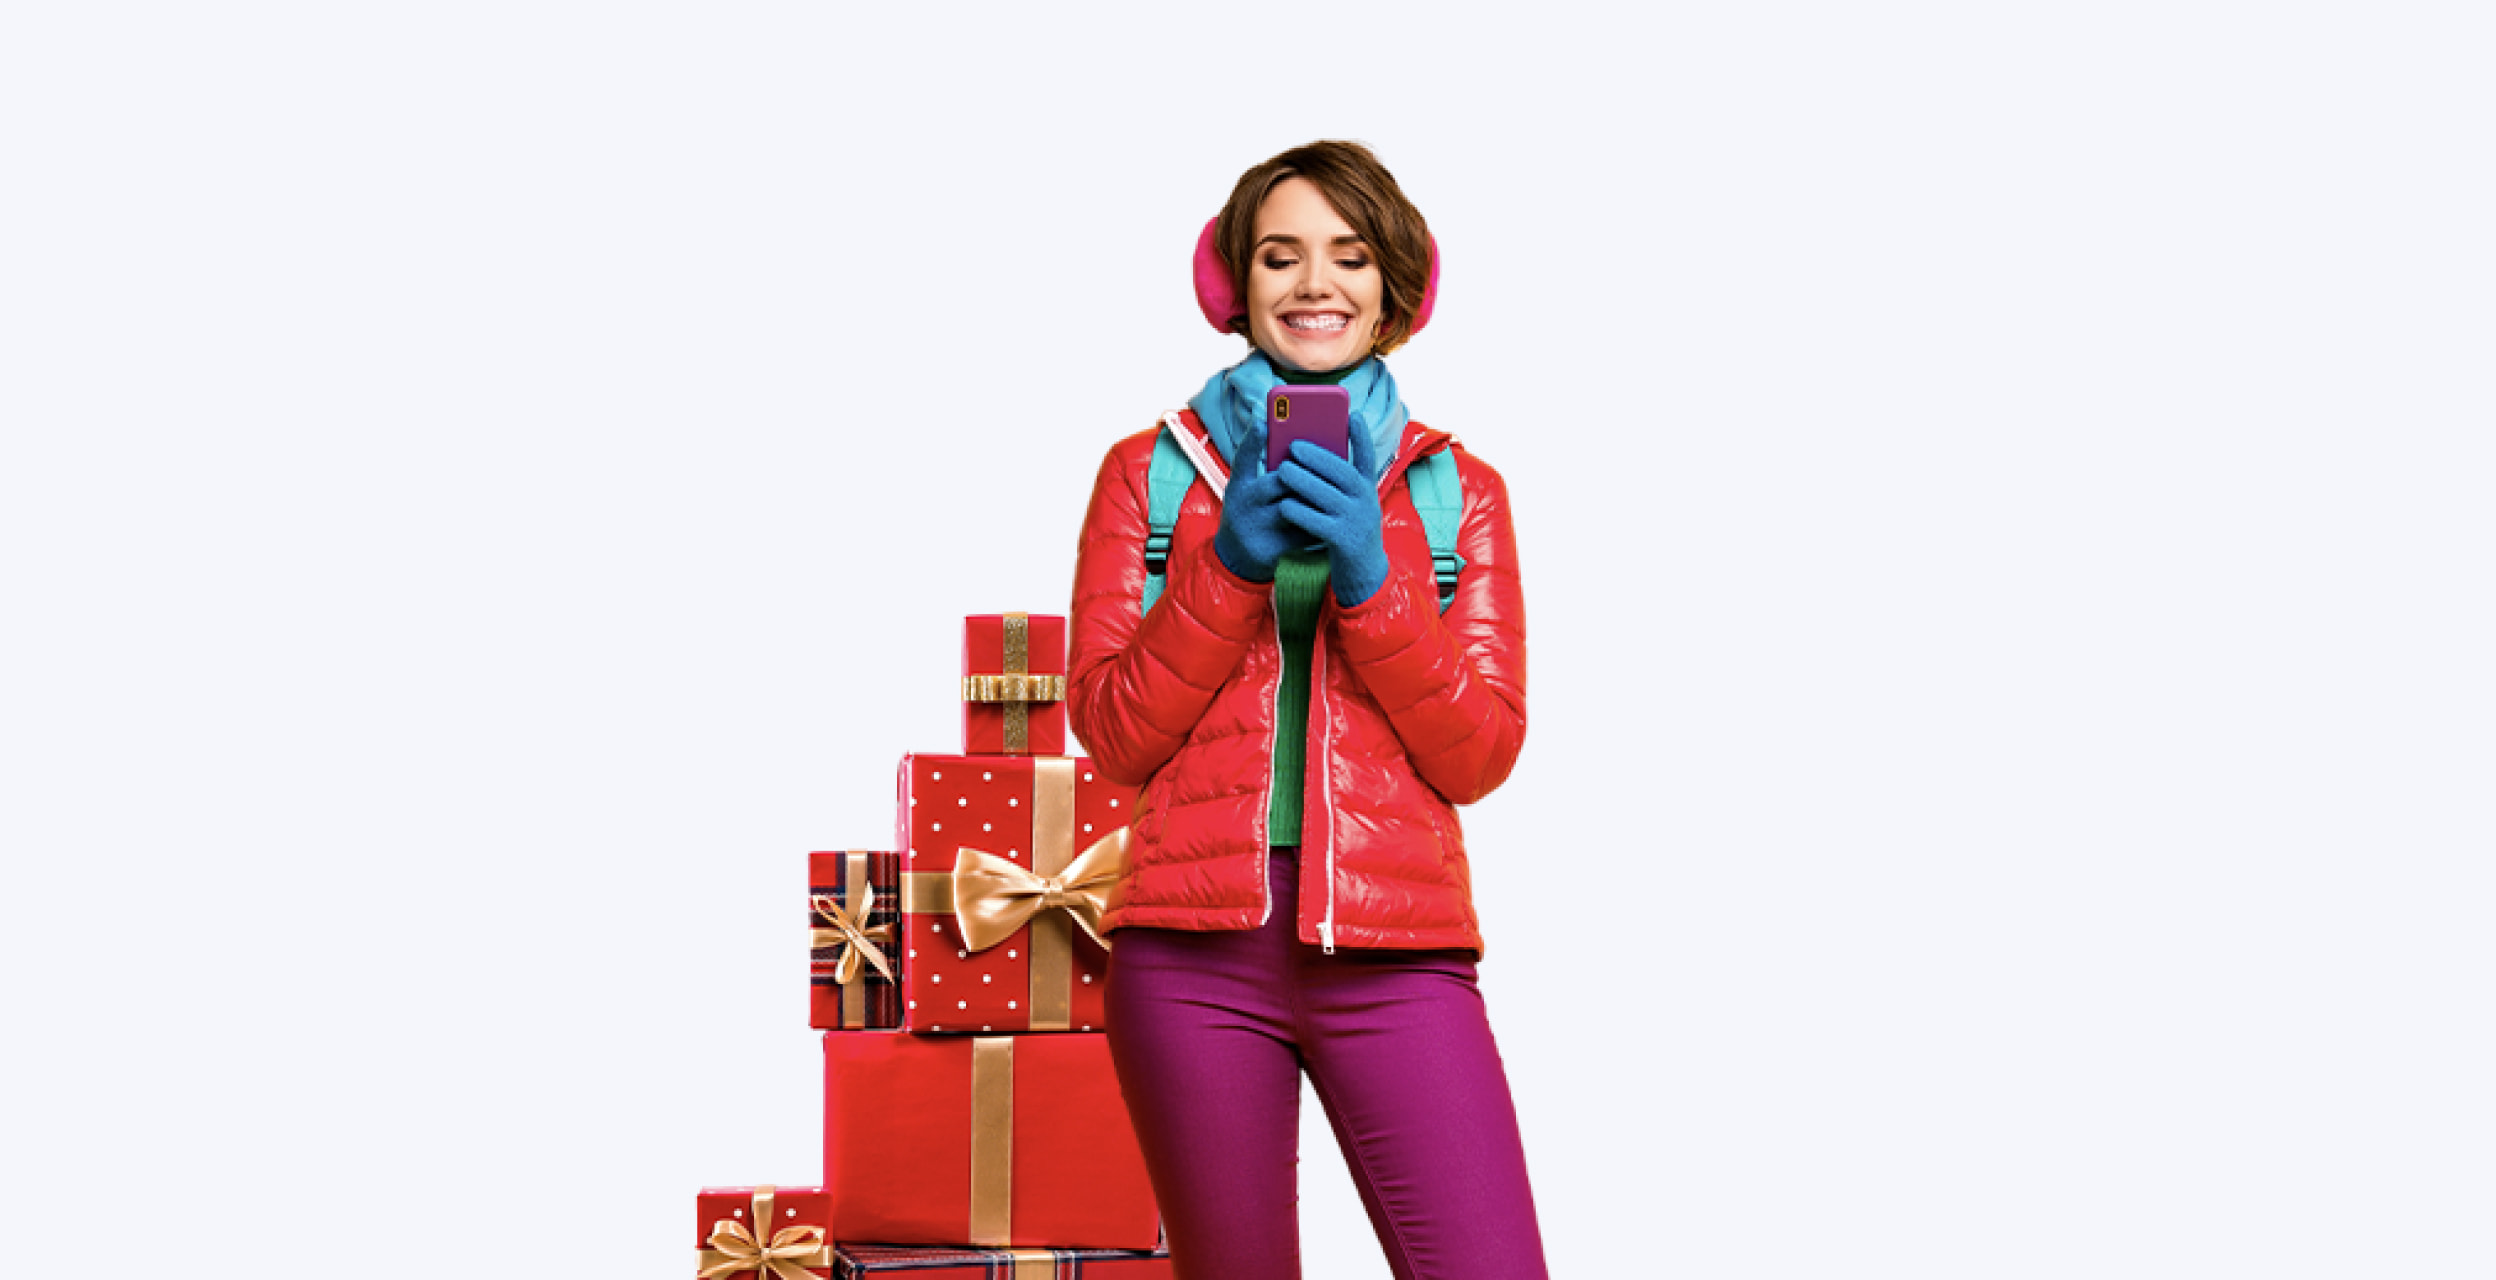 SMS Holiday Marketing Best Practices